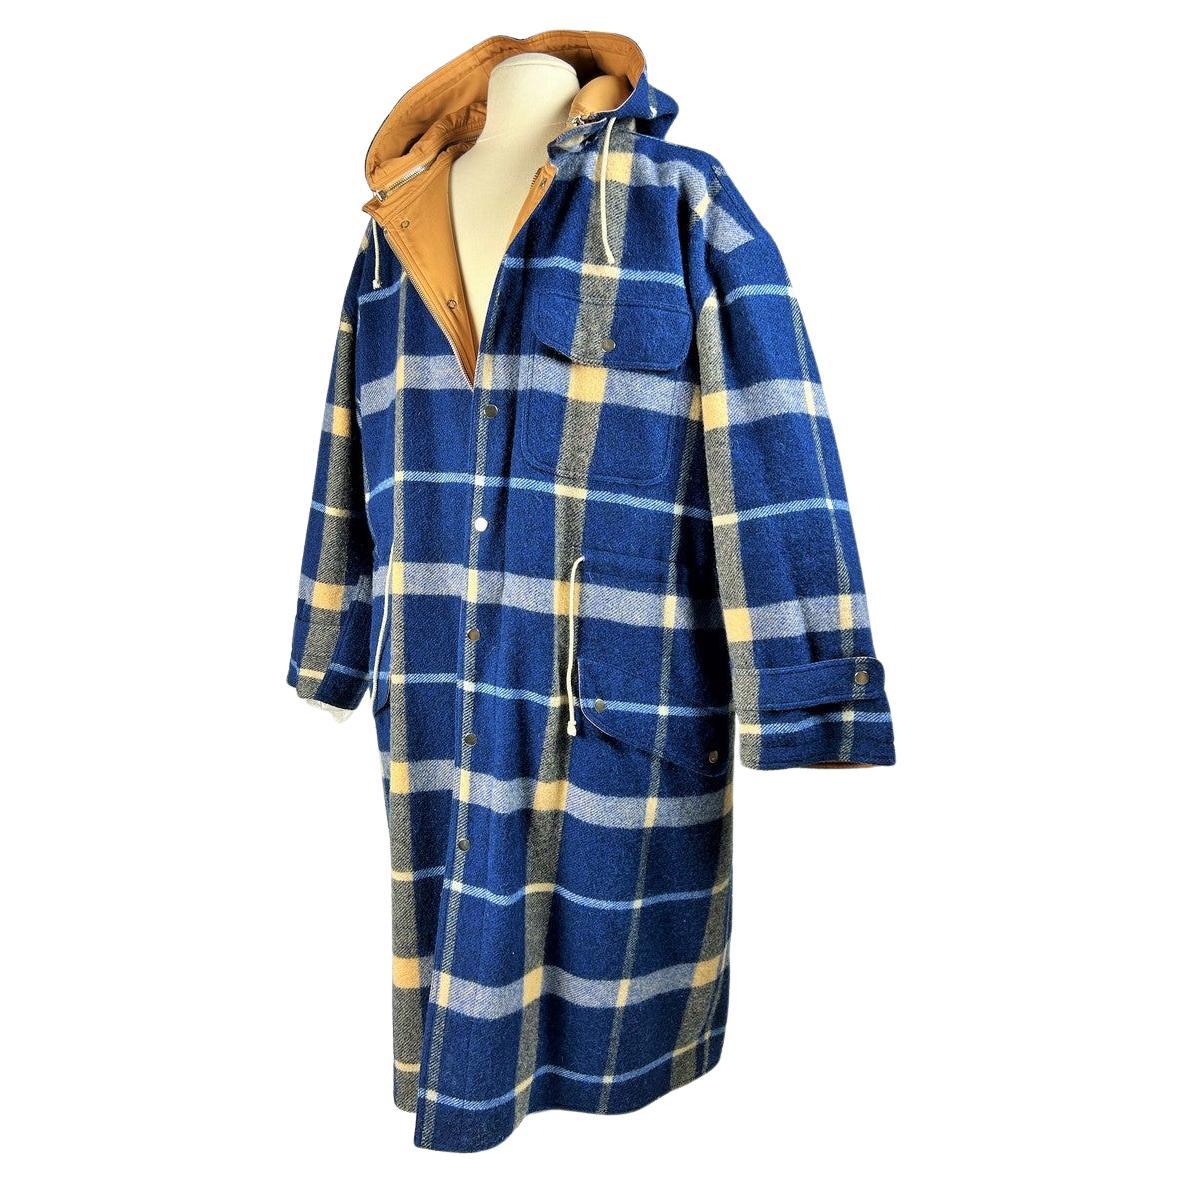 A Men's Wool Tartan Trenchcoat by André Courrèges - France Circa 2000 For Sale